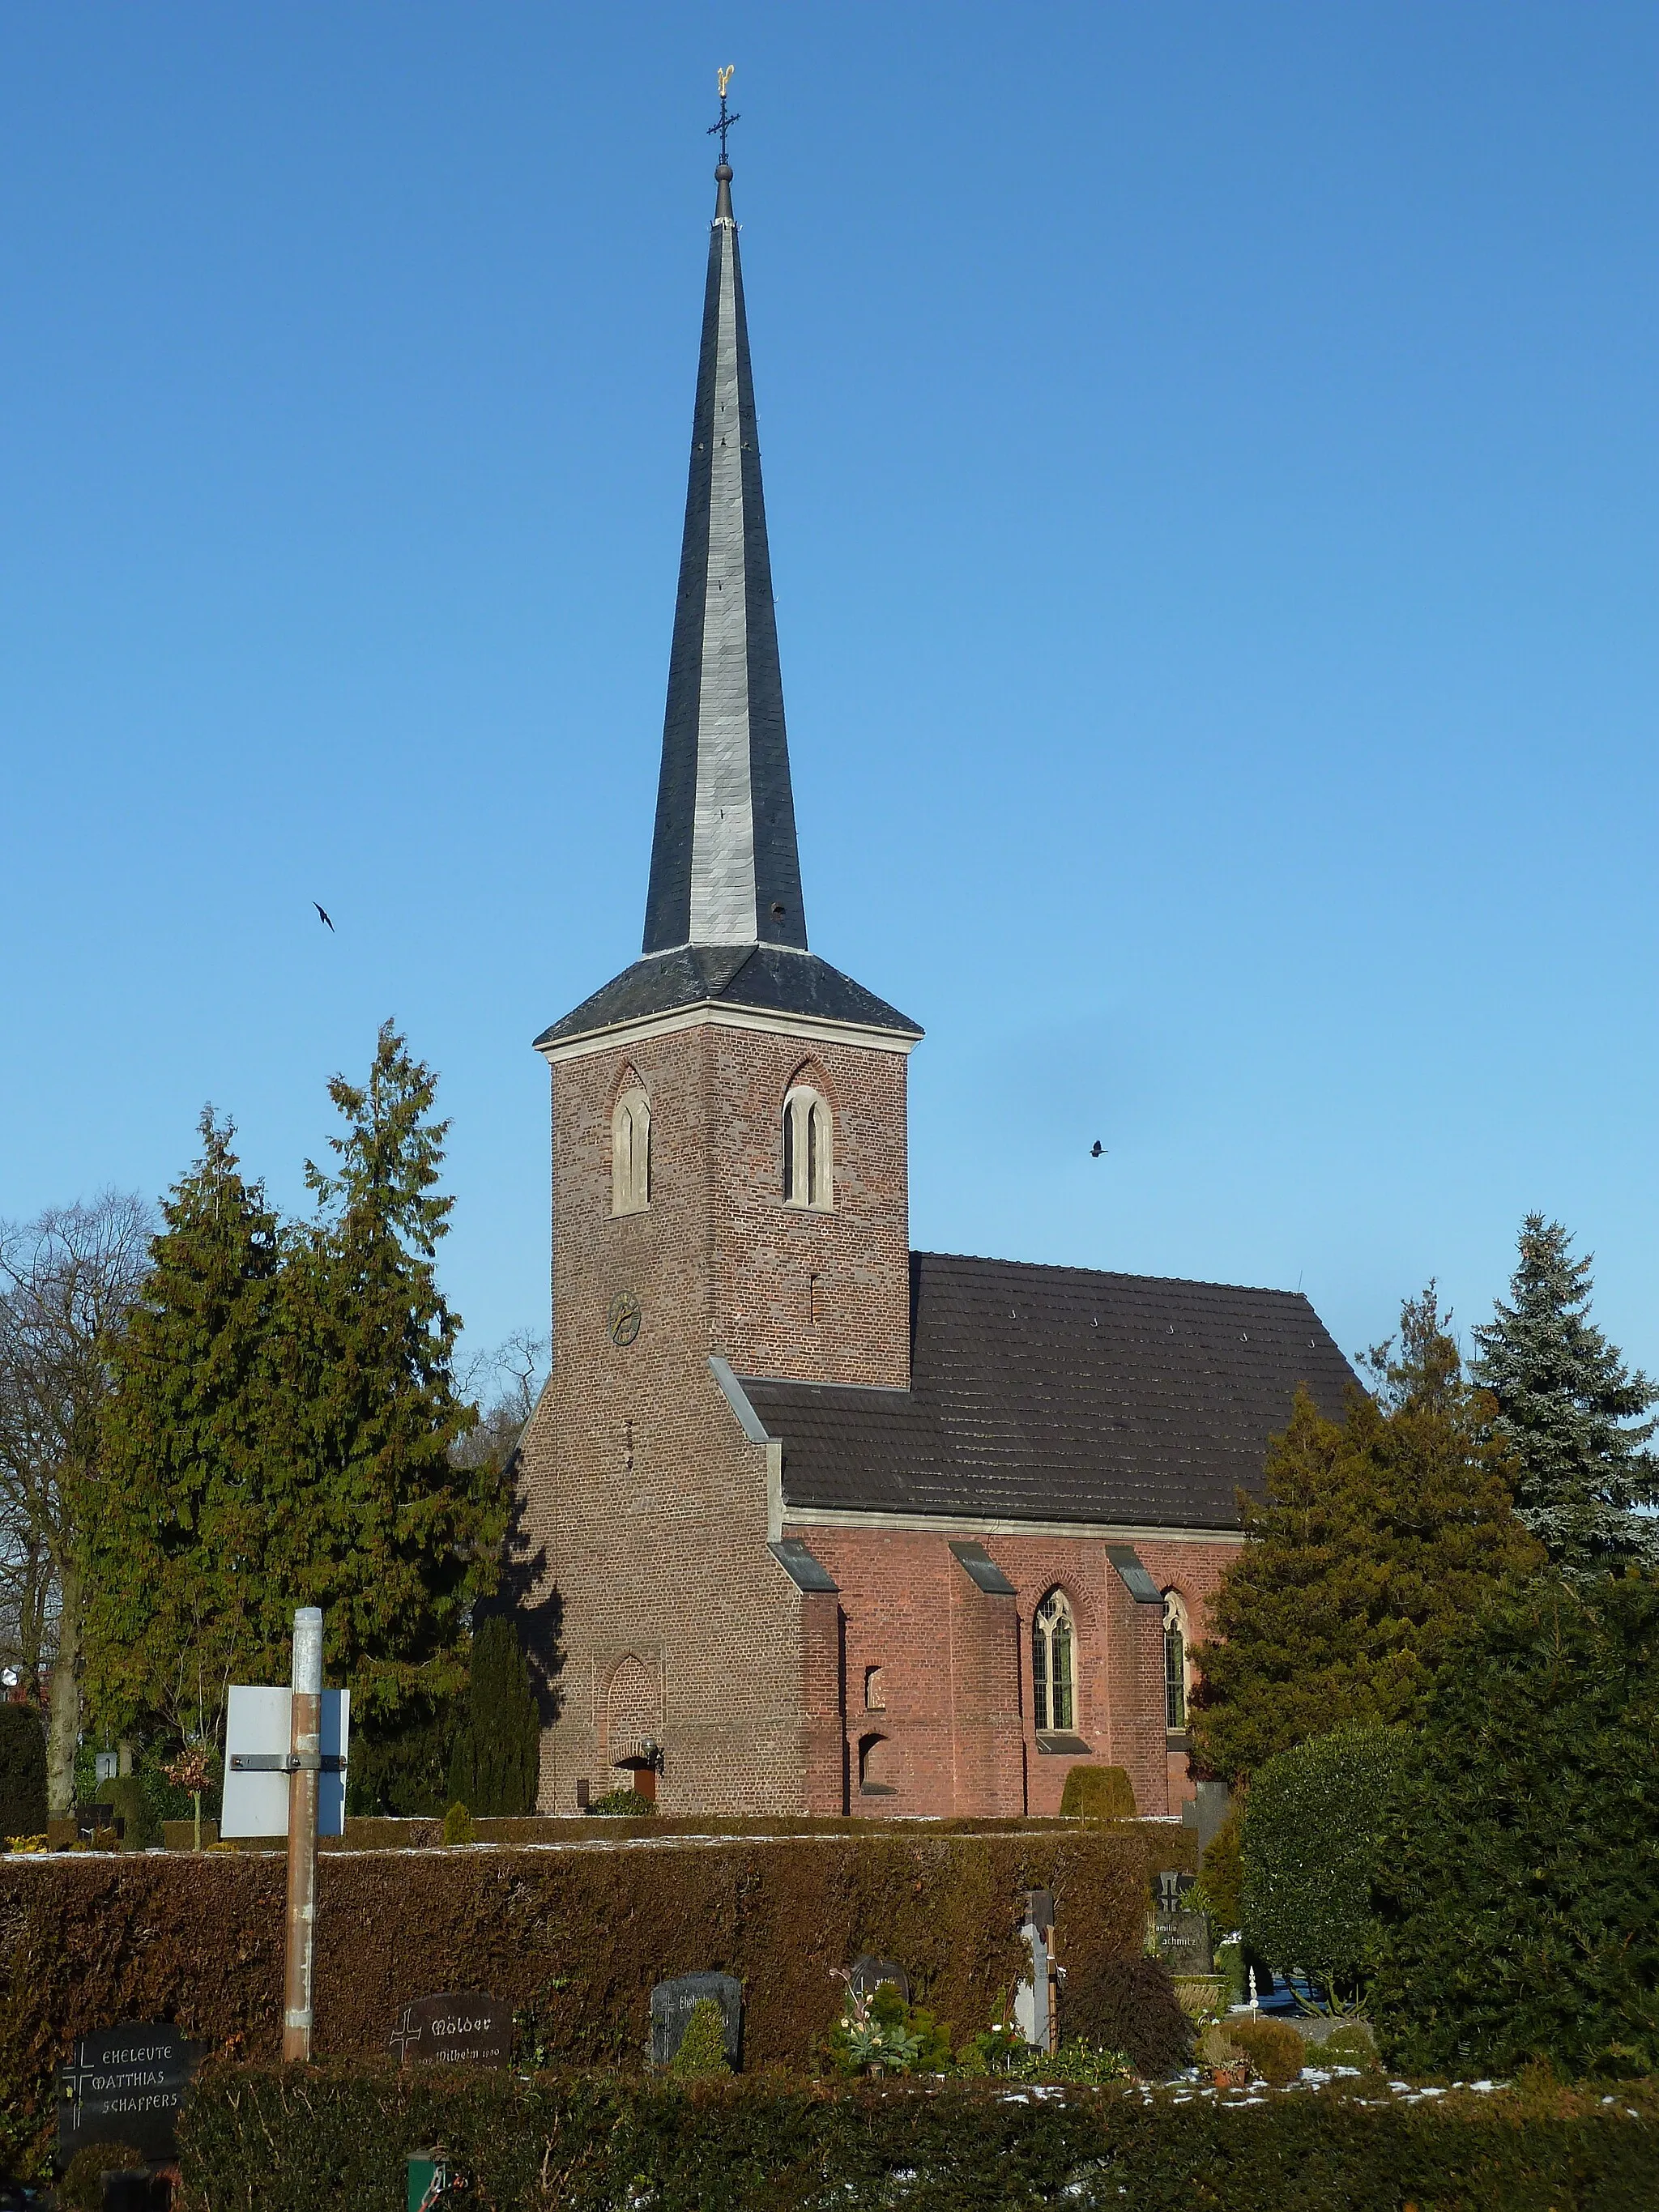 Photo showing: Friedhofskirche Twisteden

This  image shows a heritage building in Germany, located in the North Rhine-Westphalian city Kevelaer (no. A 176).